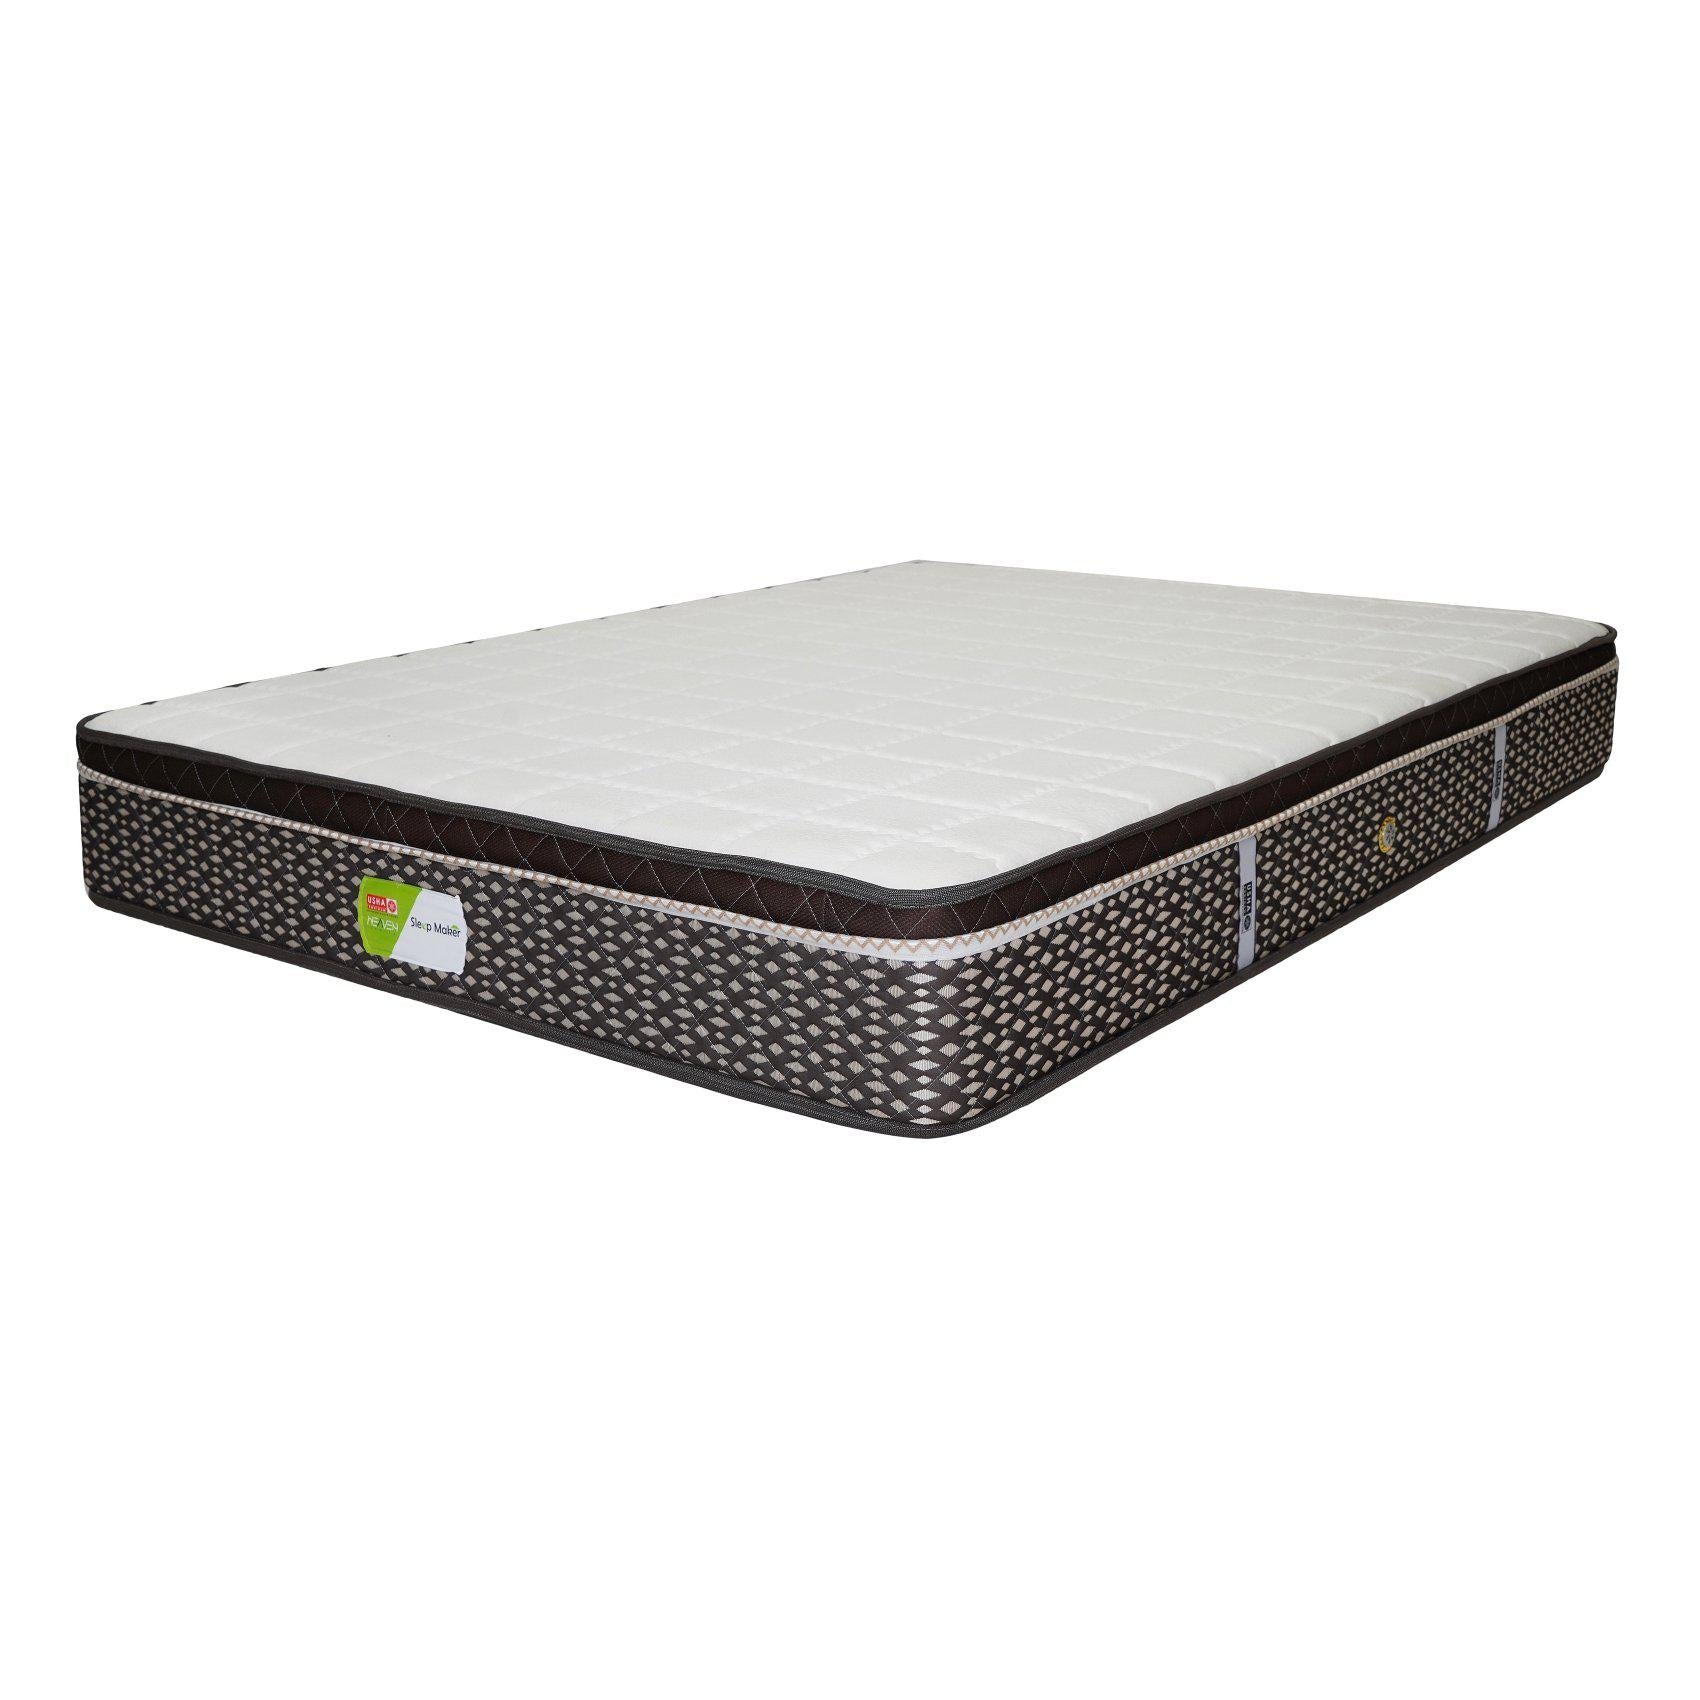 Bonnell Spring Mattress in India